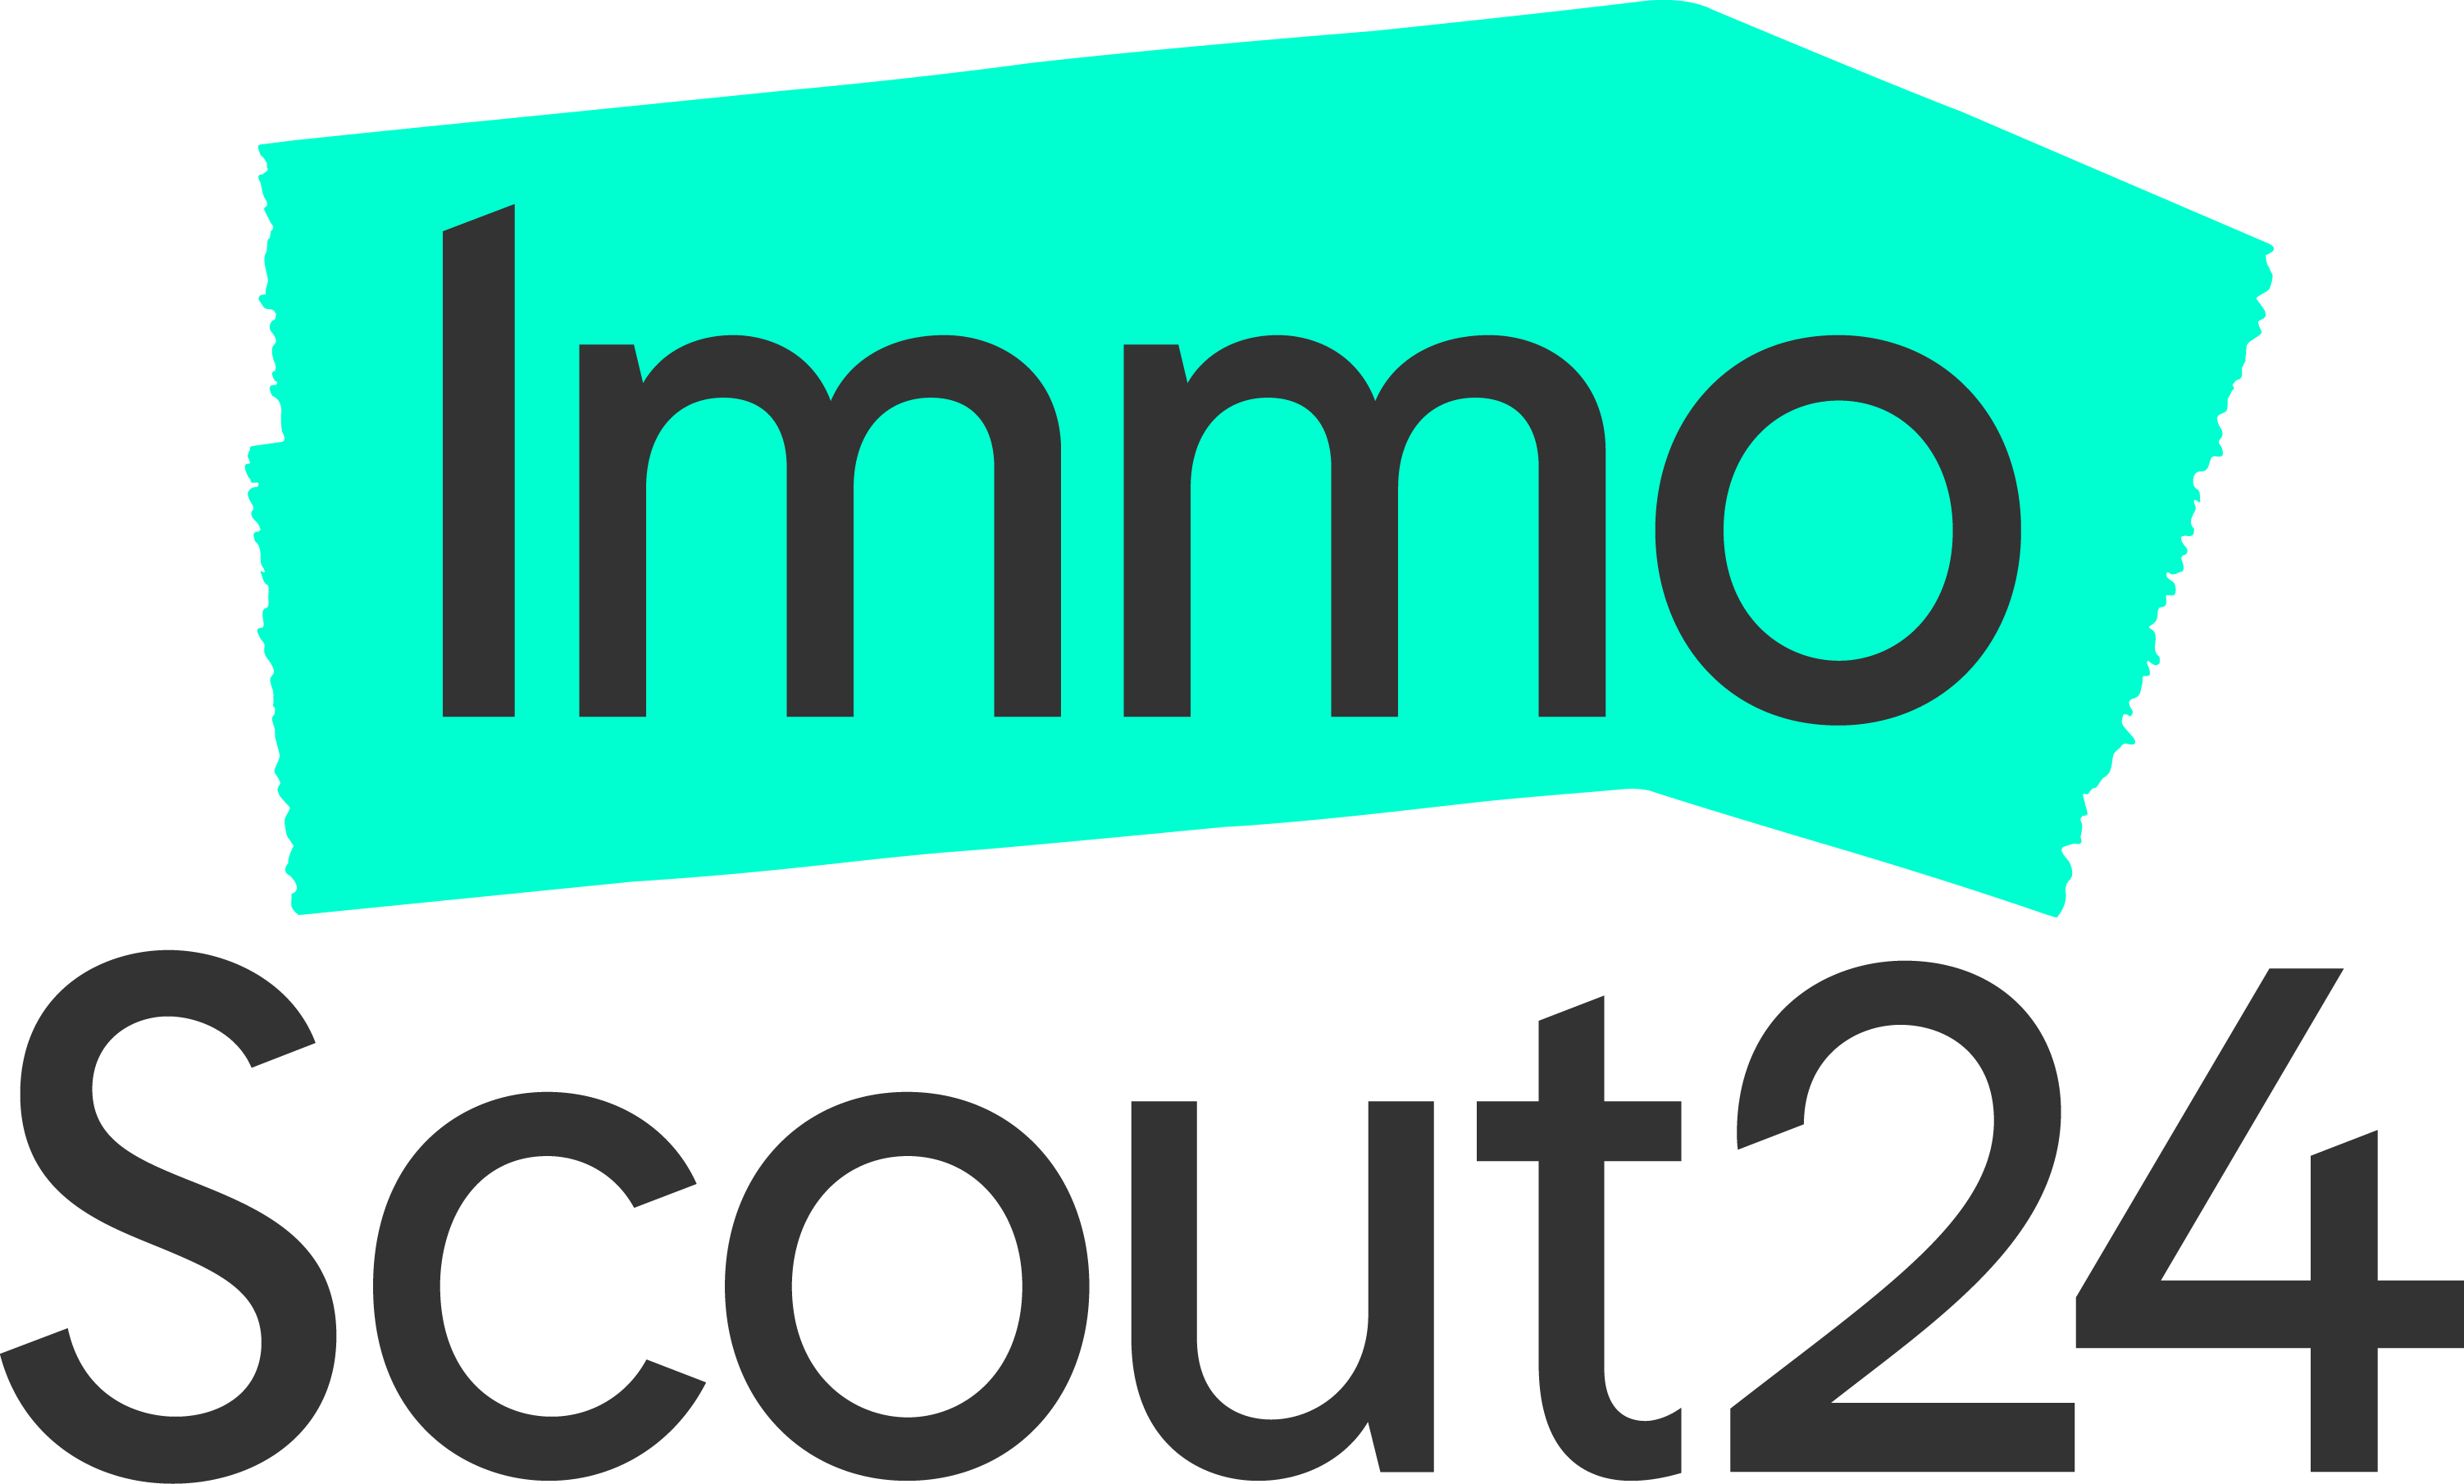 ImmoScout24_primary_solid